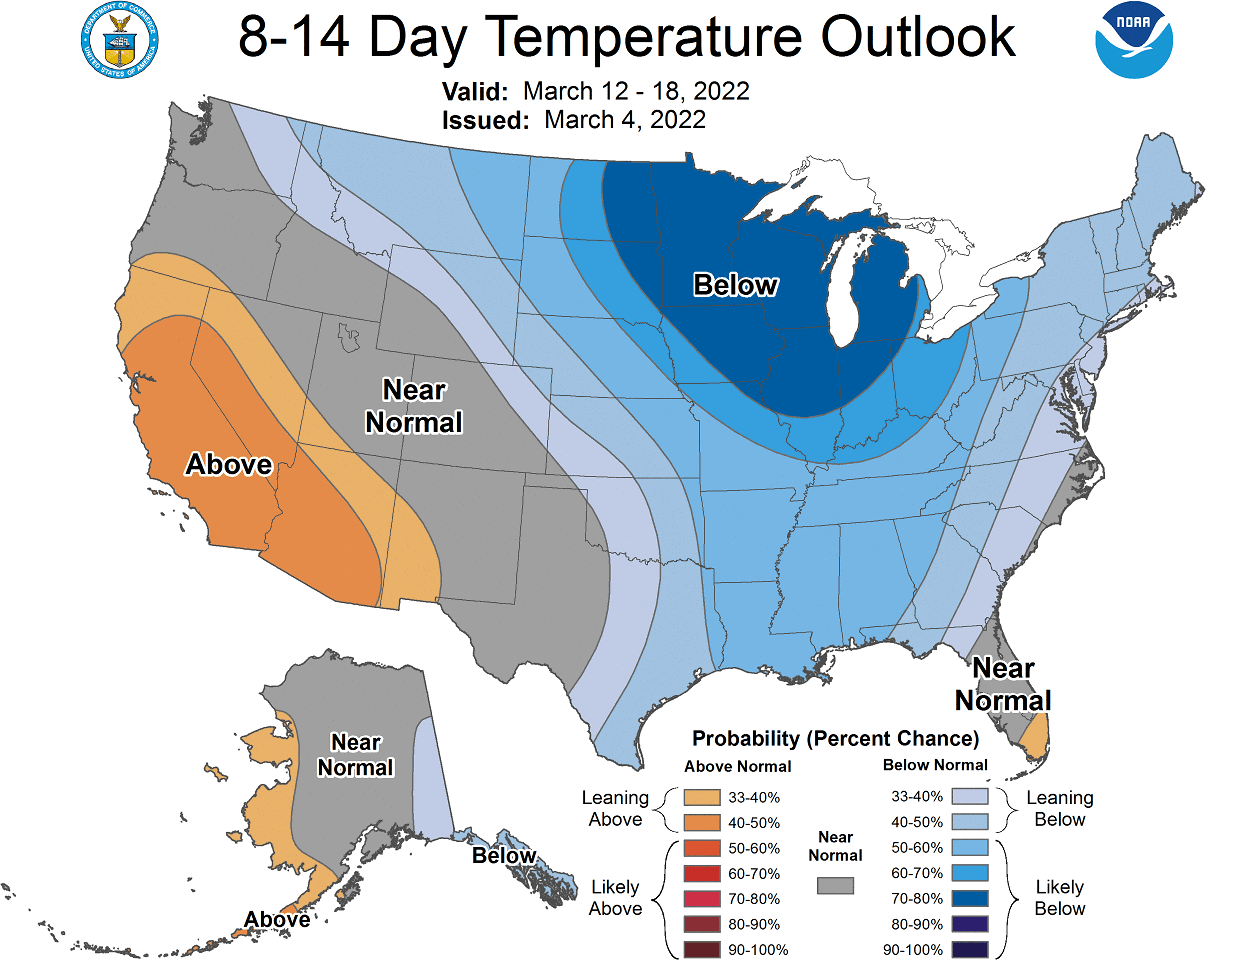 weather-forecast-march-2022-united-states-official-noaa-temperature-8-14-day-outlook-mid-month